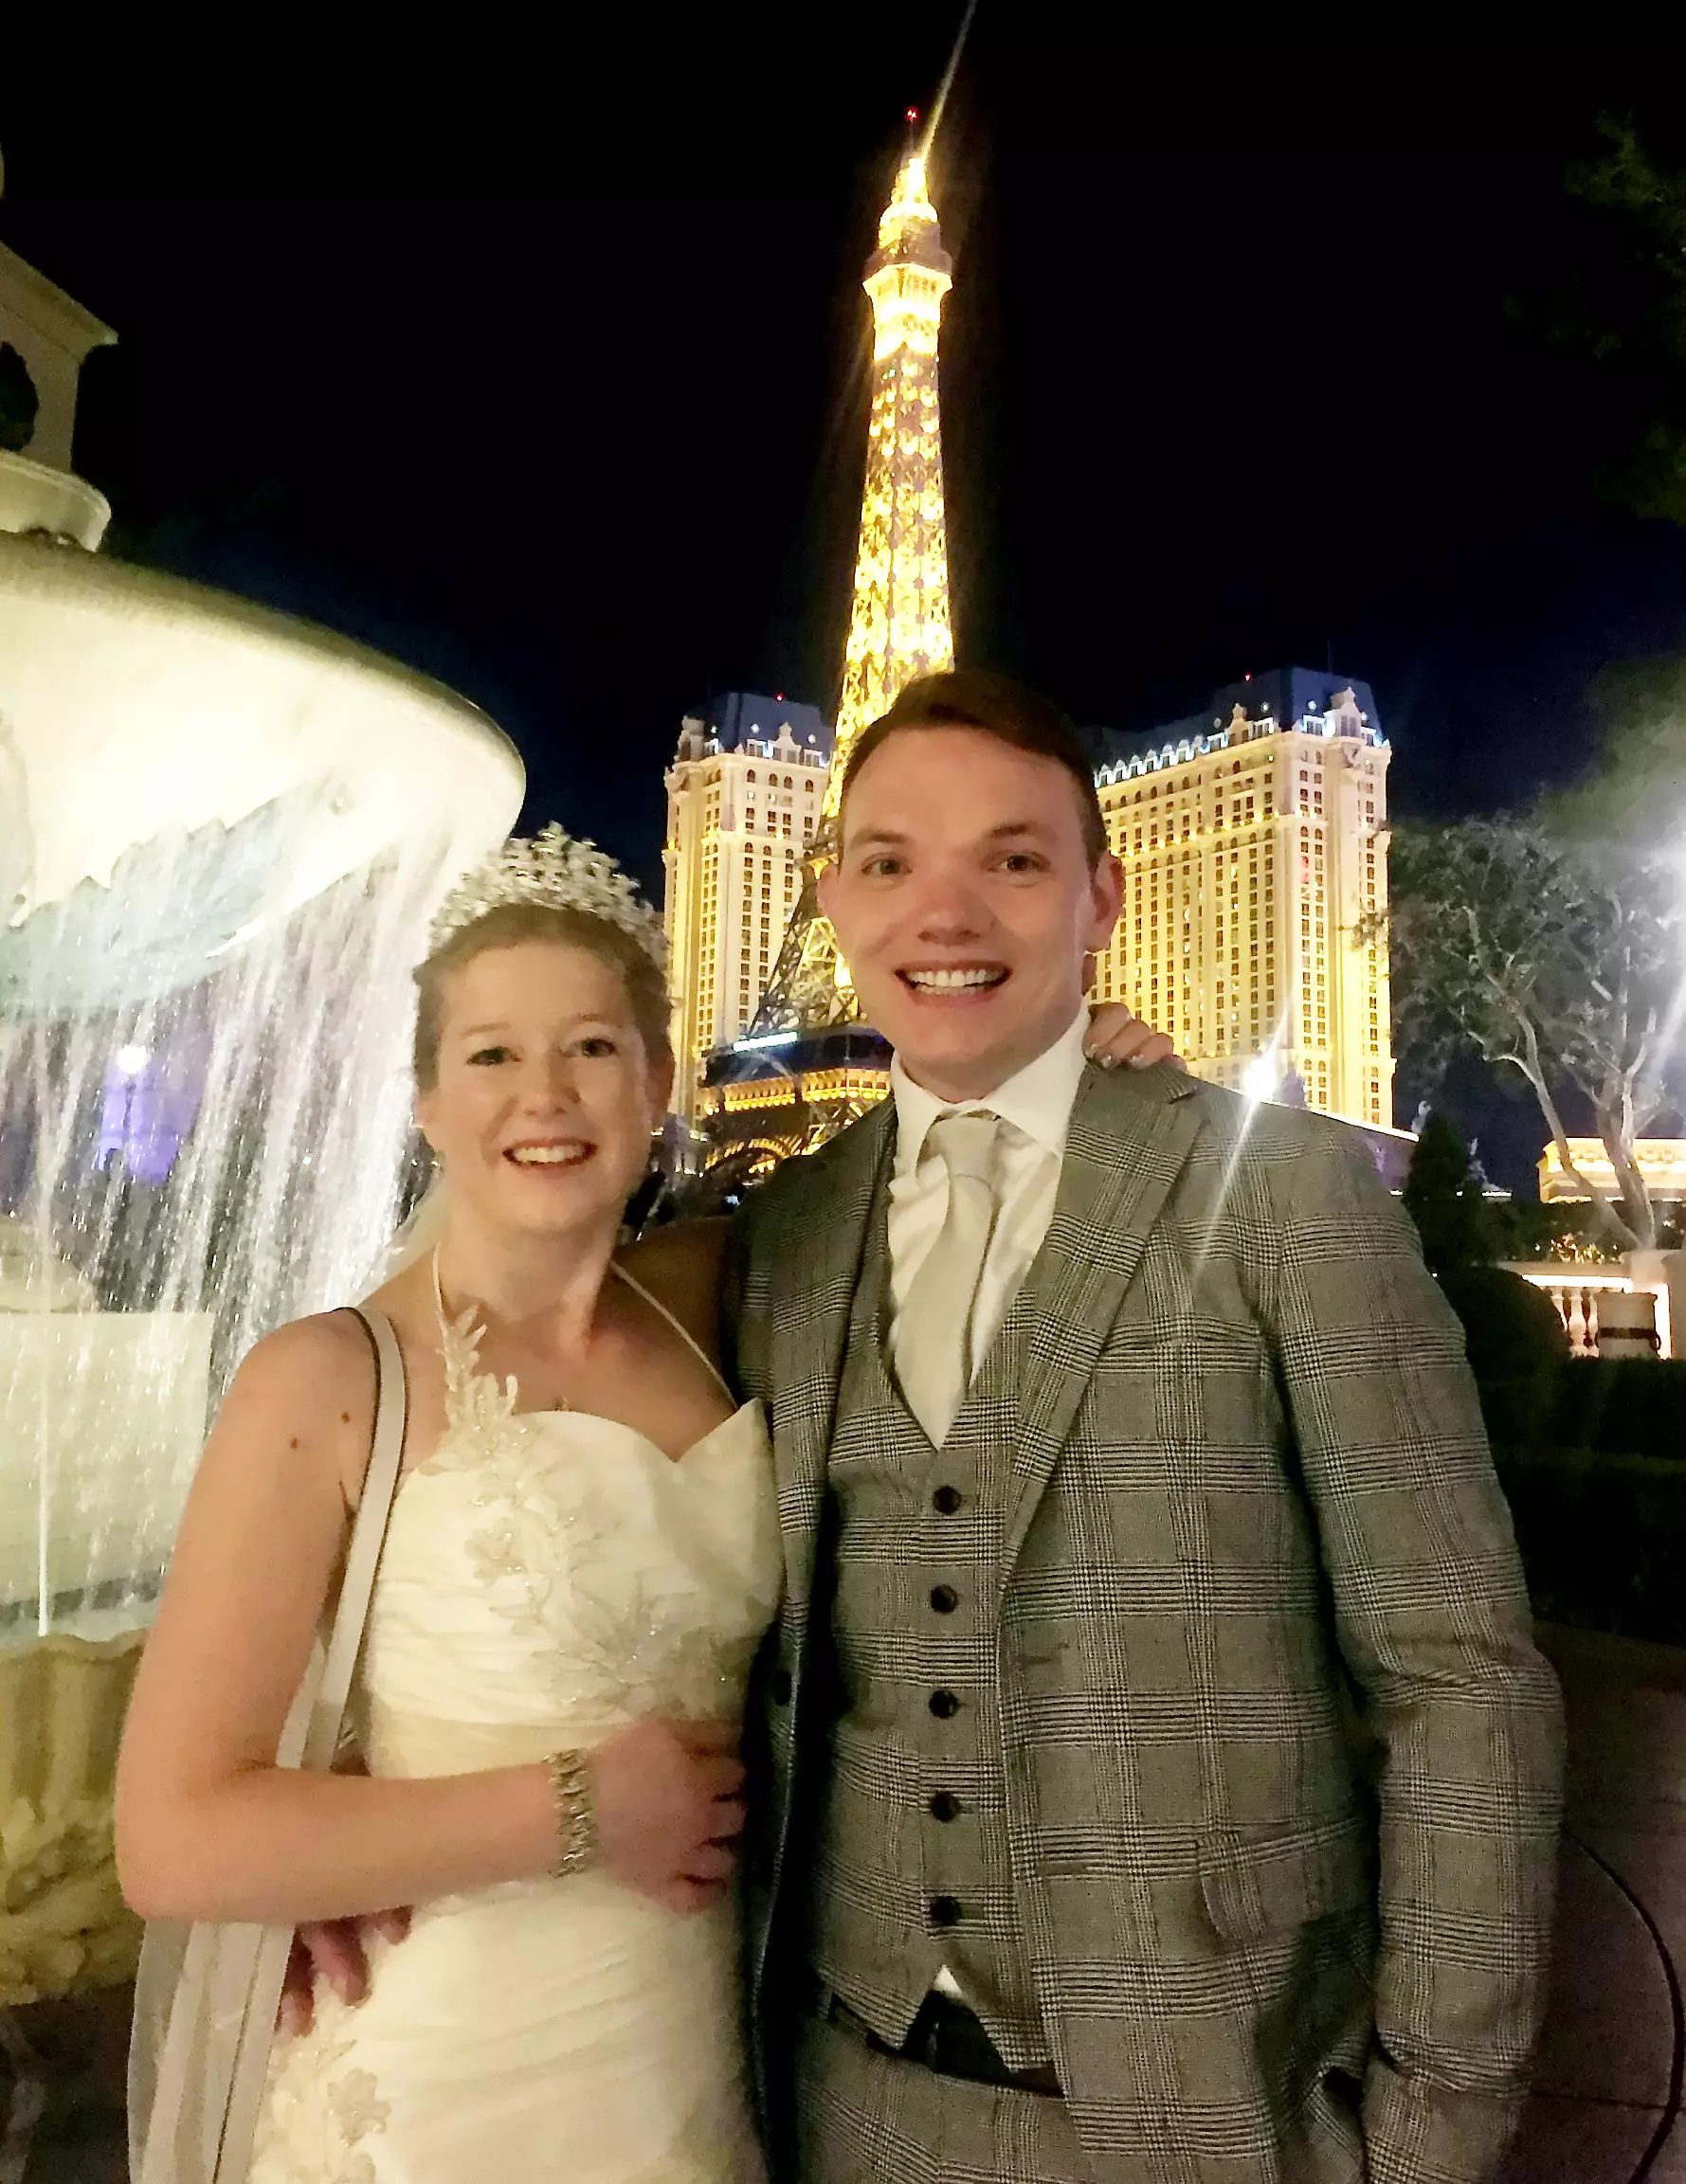 Paul and Sarah got married in Las Vegas just after meeting each other.